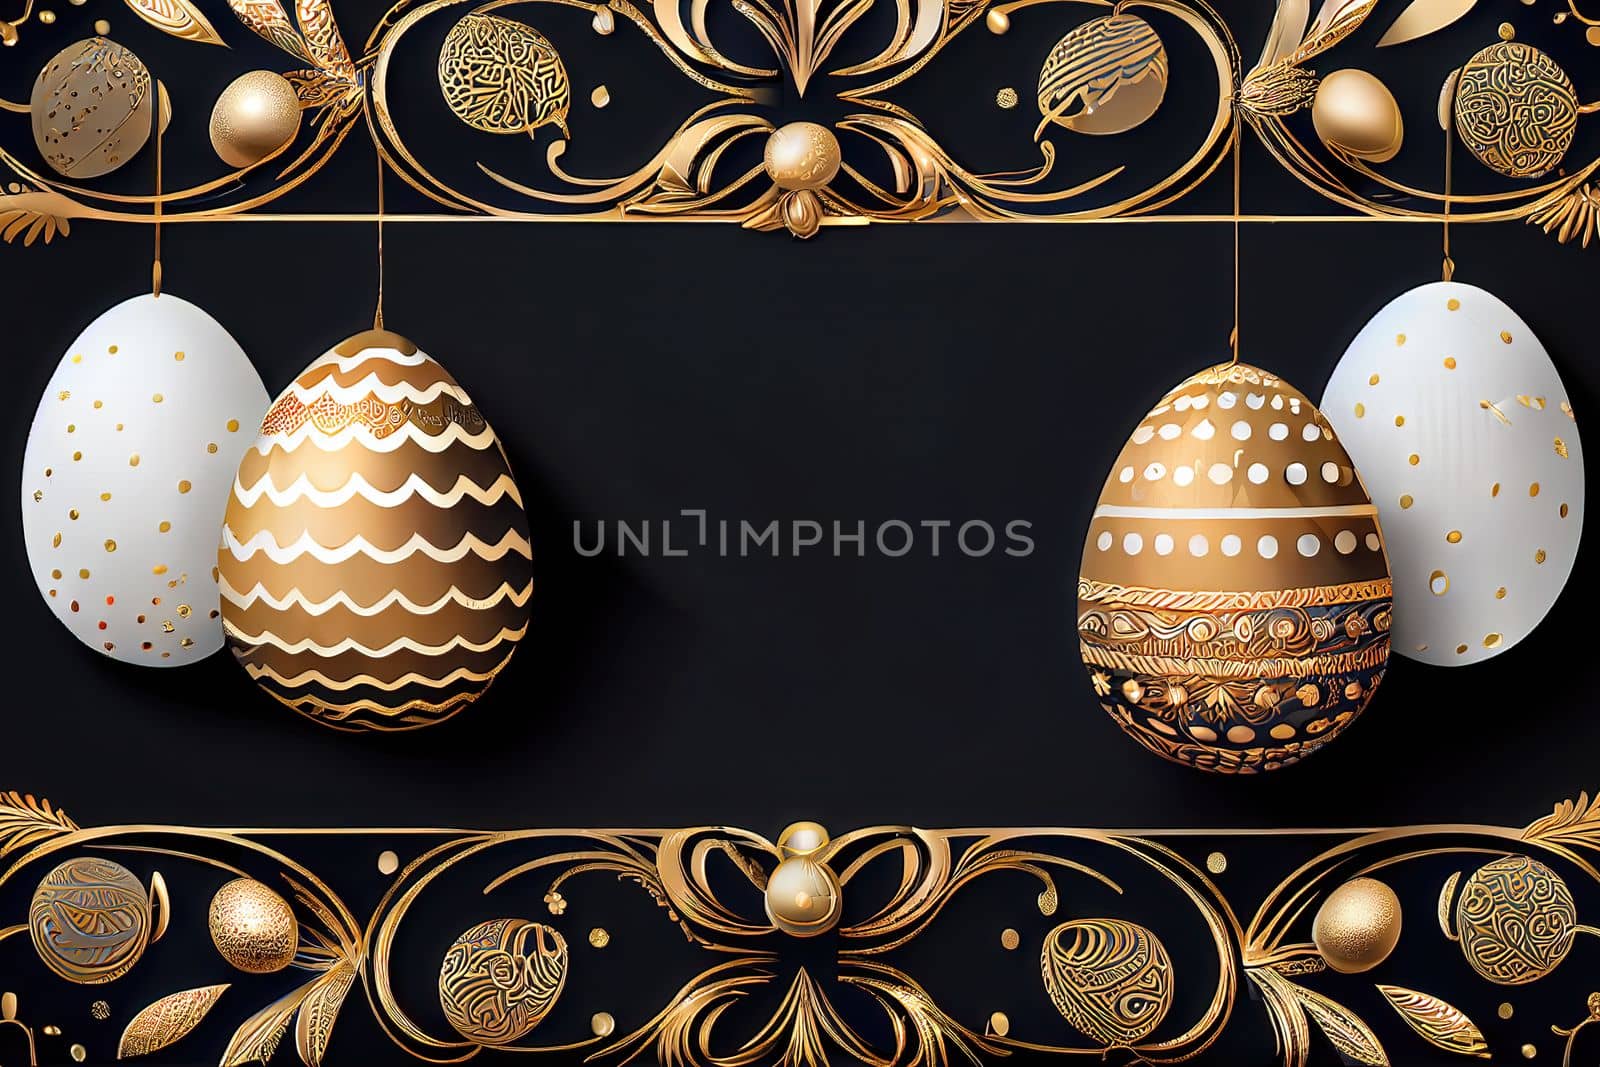 3D render of Easter egg sale banner with gold and white realistic eggs hanging on a thread, golden ornate designs on a black modern background with place for text.